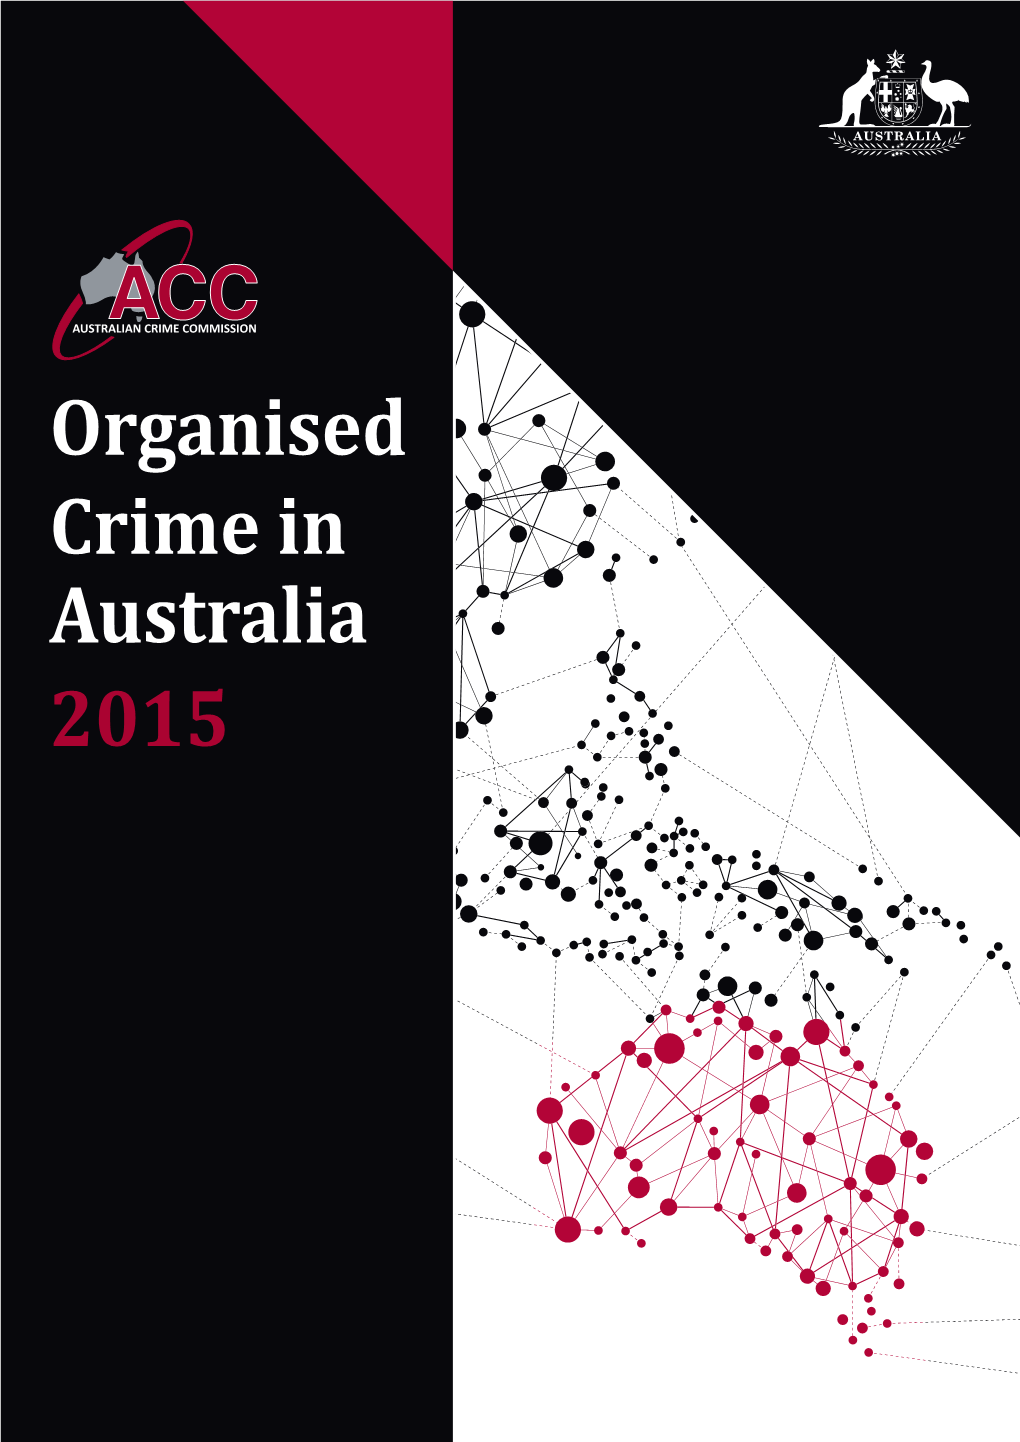 What Are the Key Characteristics of Organised Crime? 7 How Does Organised Crime Affect Us? 8 How Are We Responding? 9